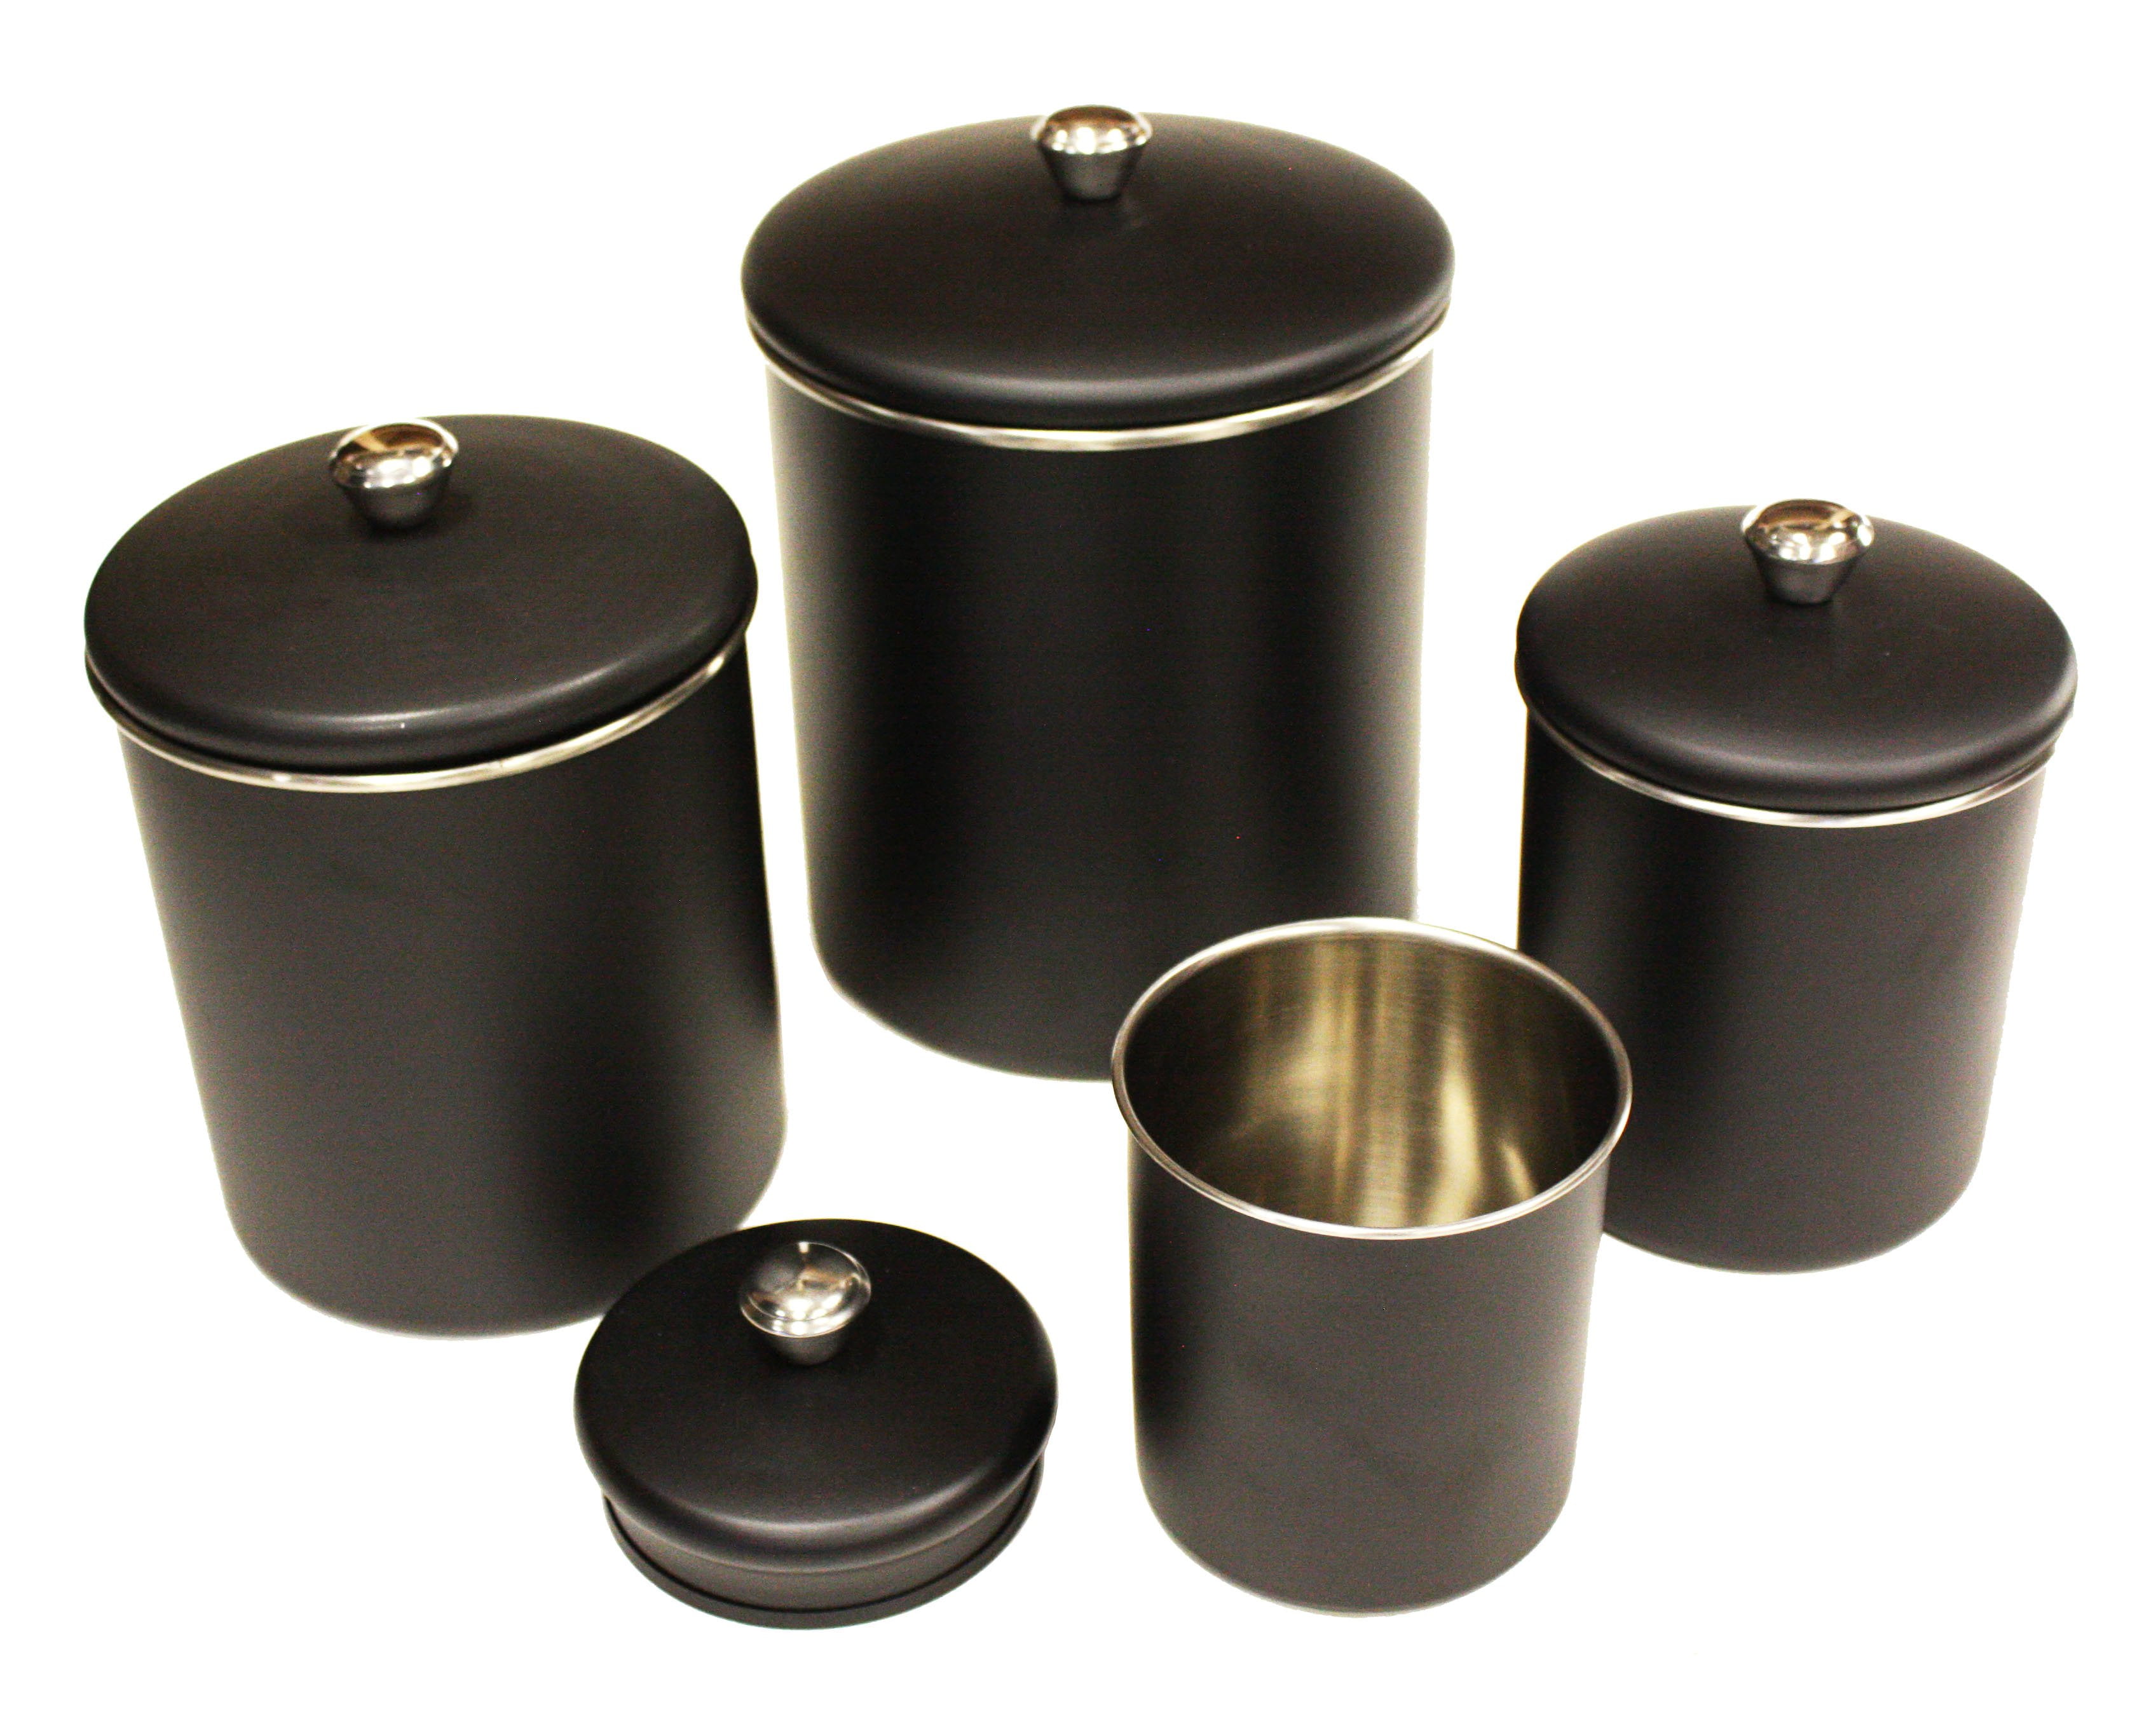 Black Stainless Steel Kitchen Canisters